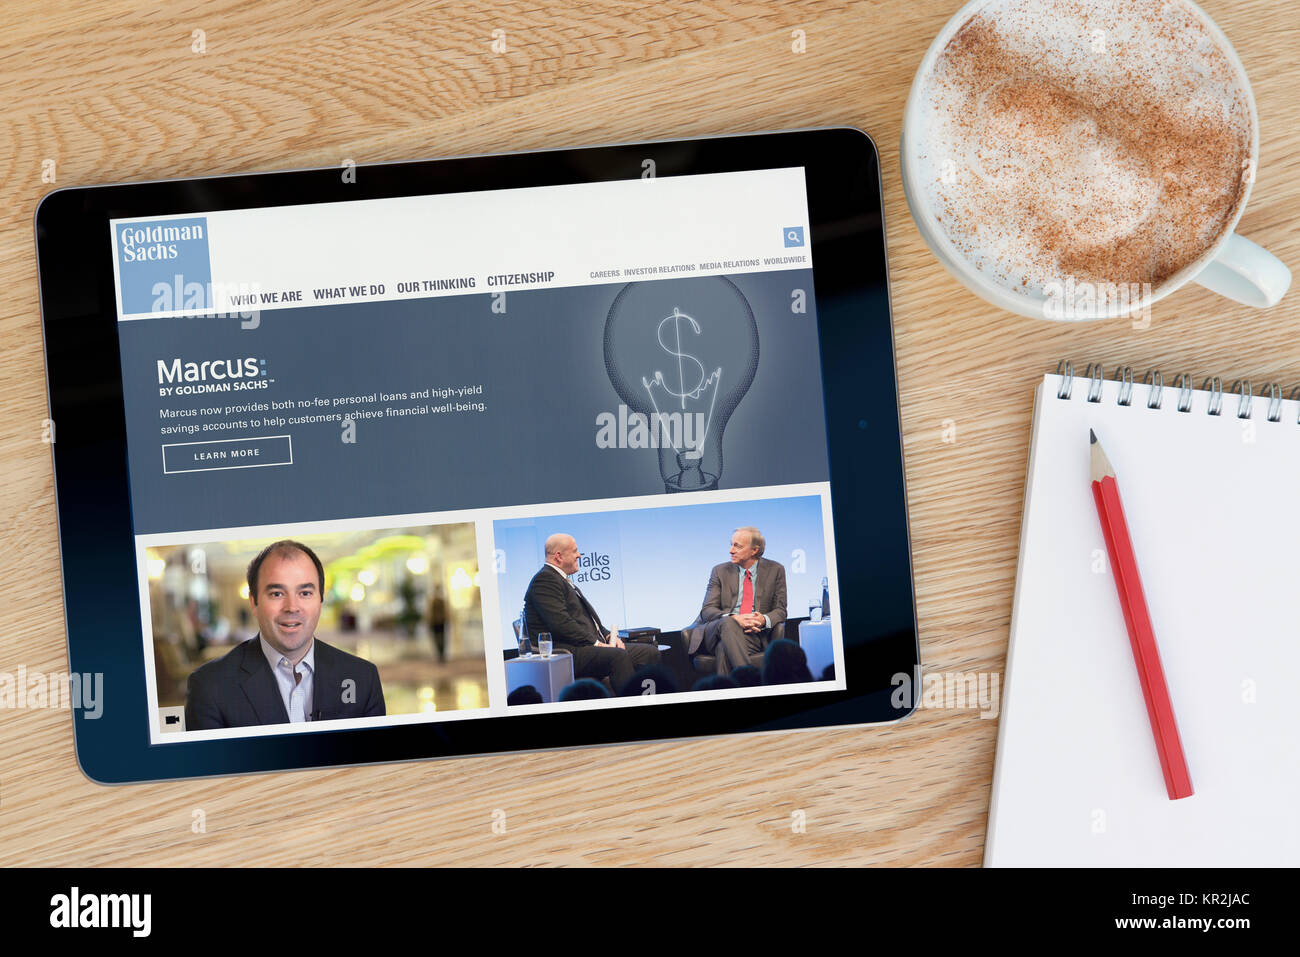 The Goldman Sachs website on an iPad tablet device which rests on a wooden table beside a notepad and pencil and a cup of coffee (Editorial only) Stock Photo